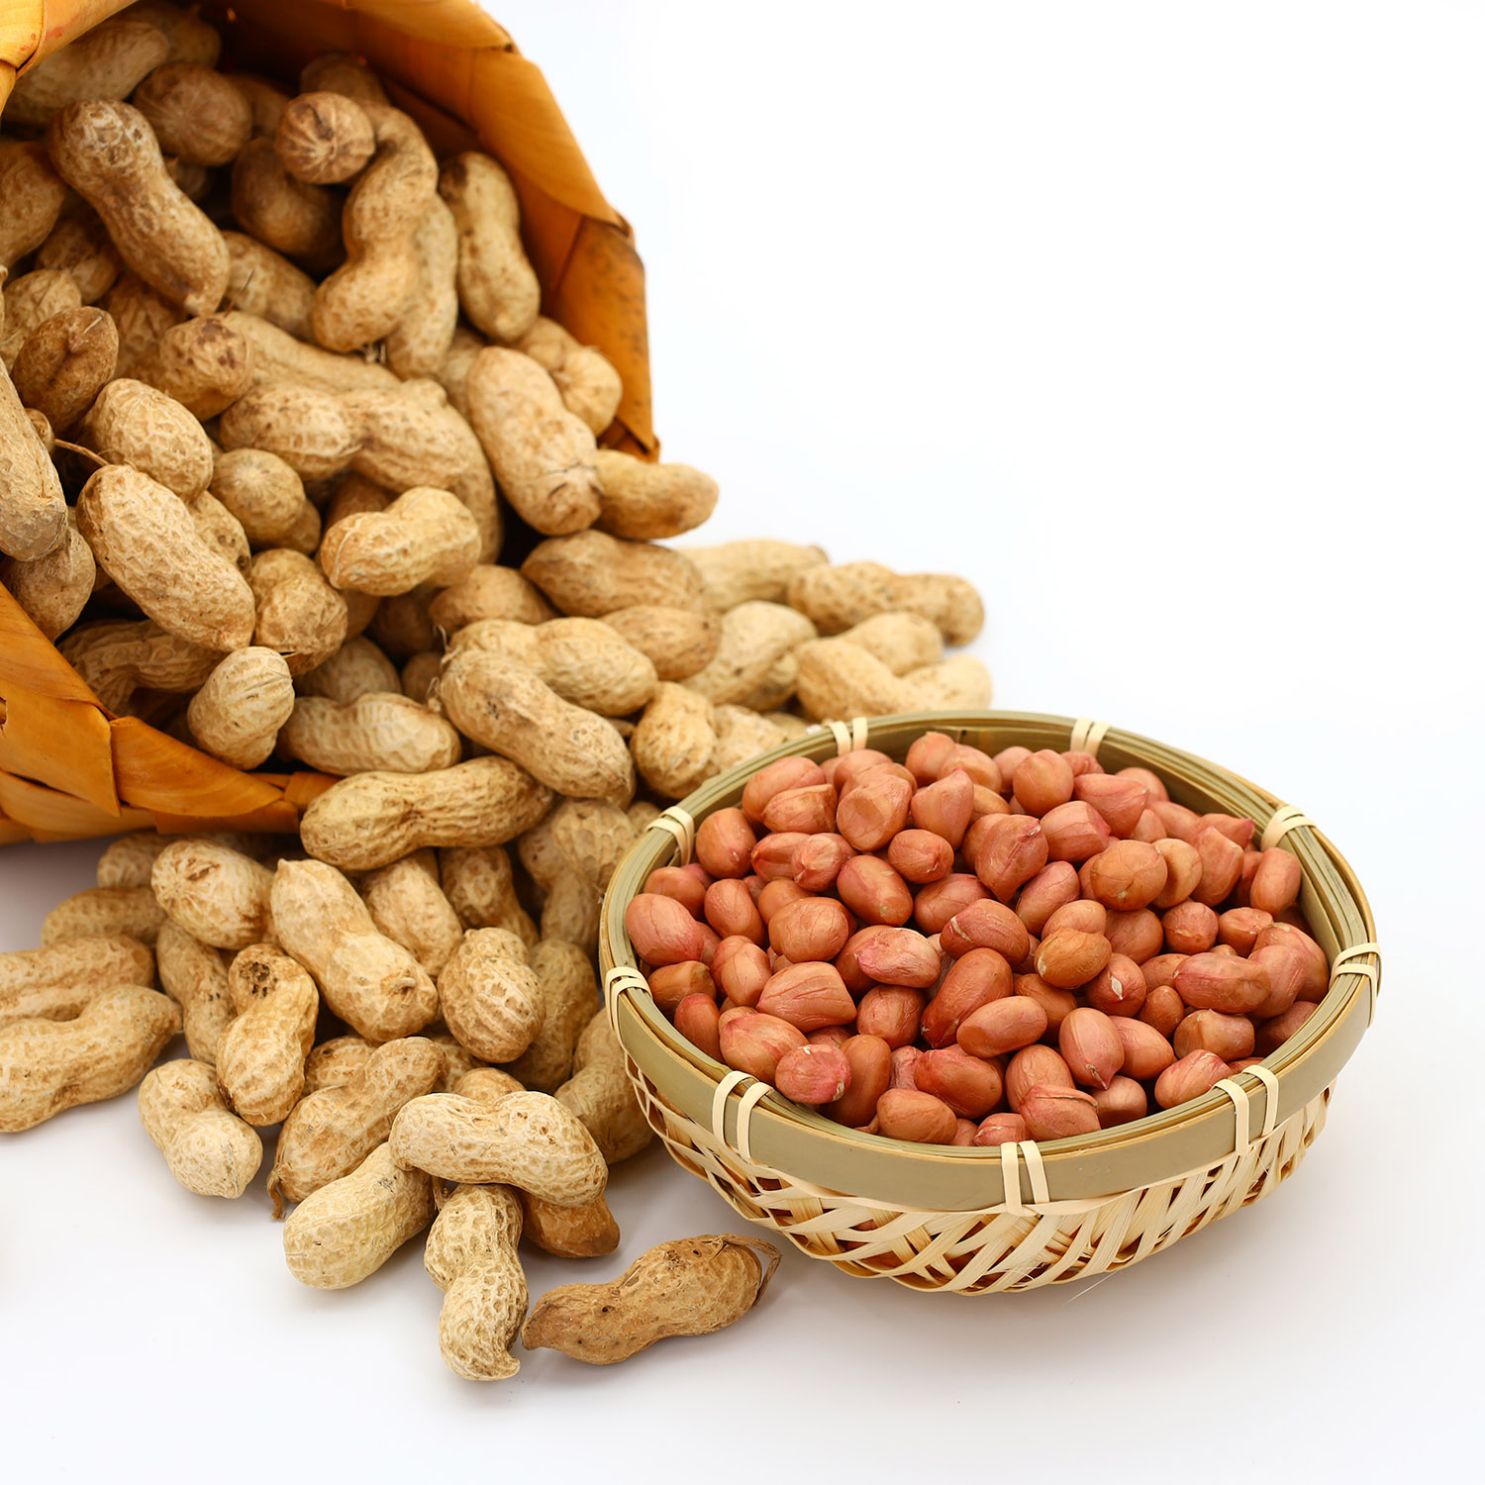 Is eating peanuts often beneficial to cardiovascular and cerebrovascular disease？